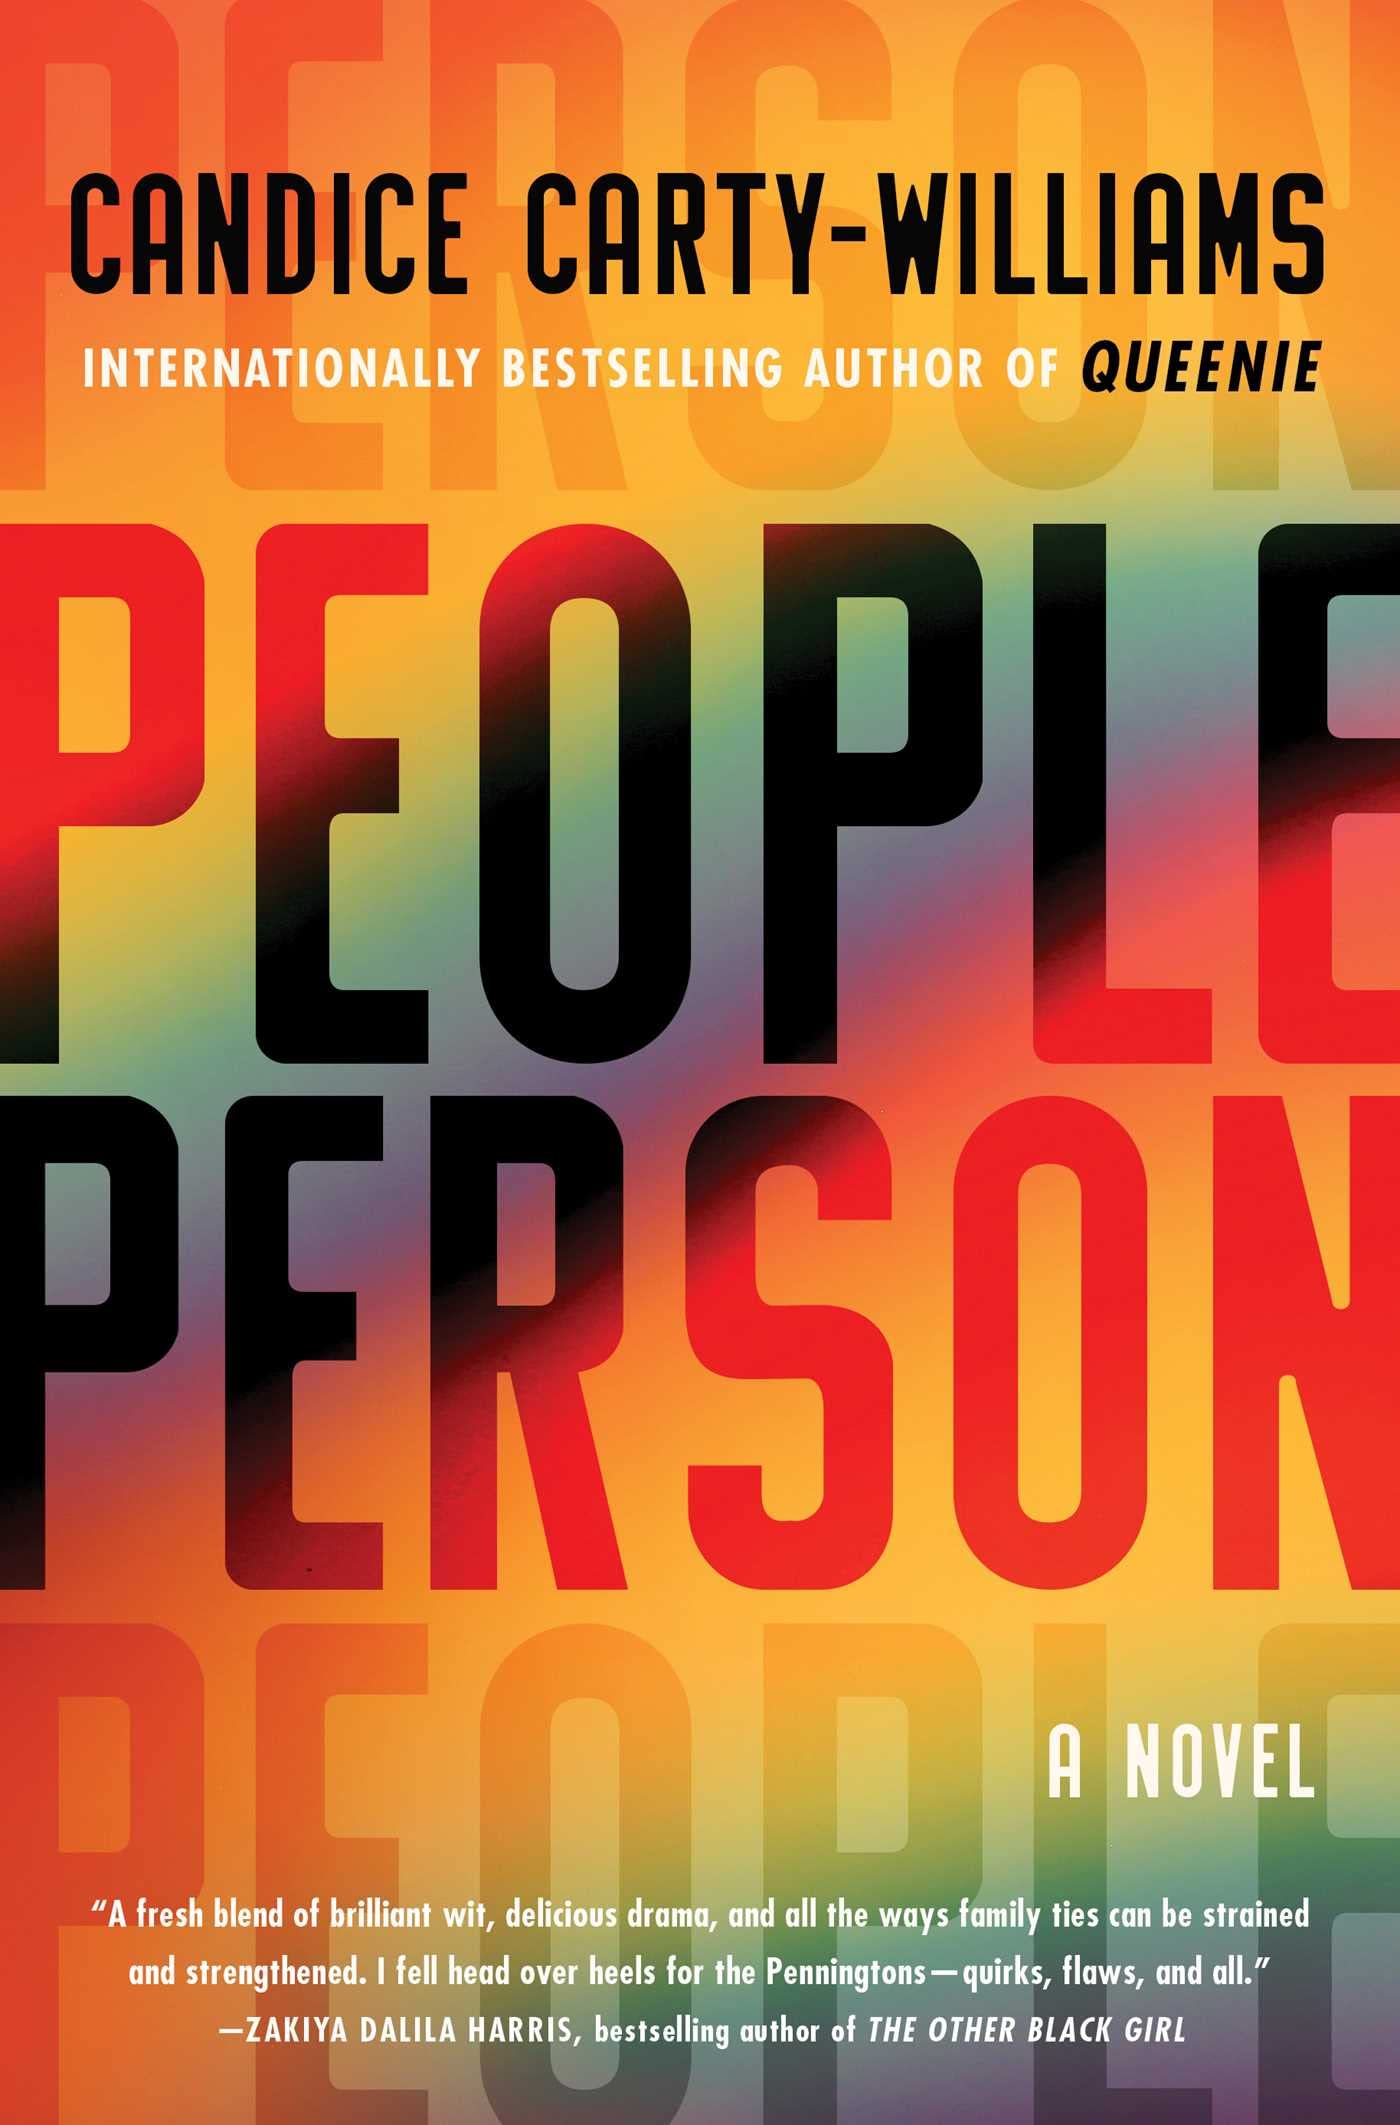 Image for "People Person"